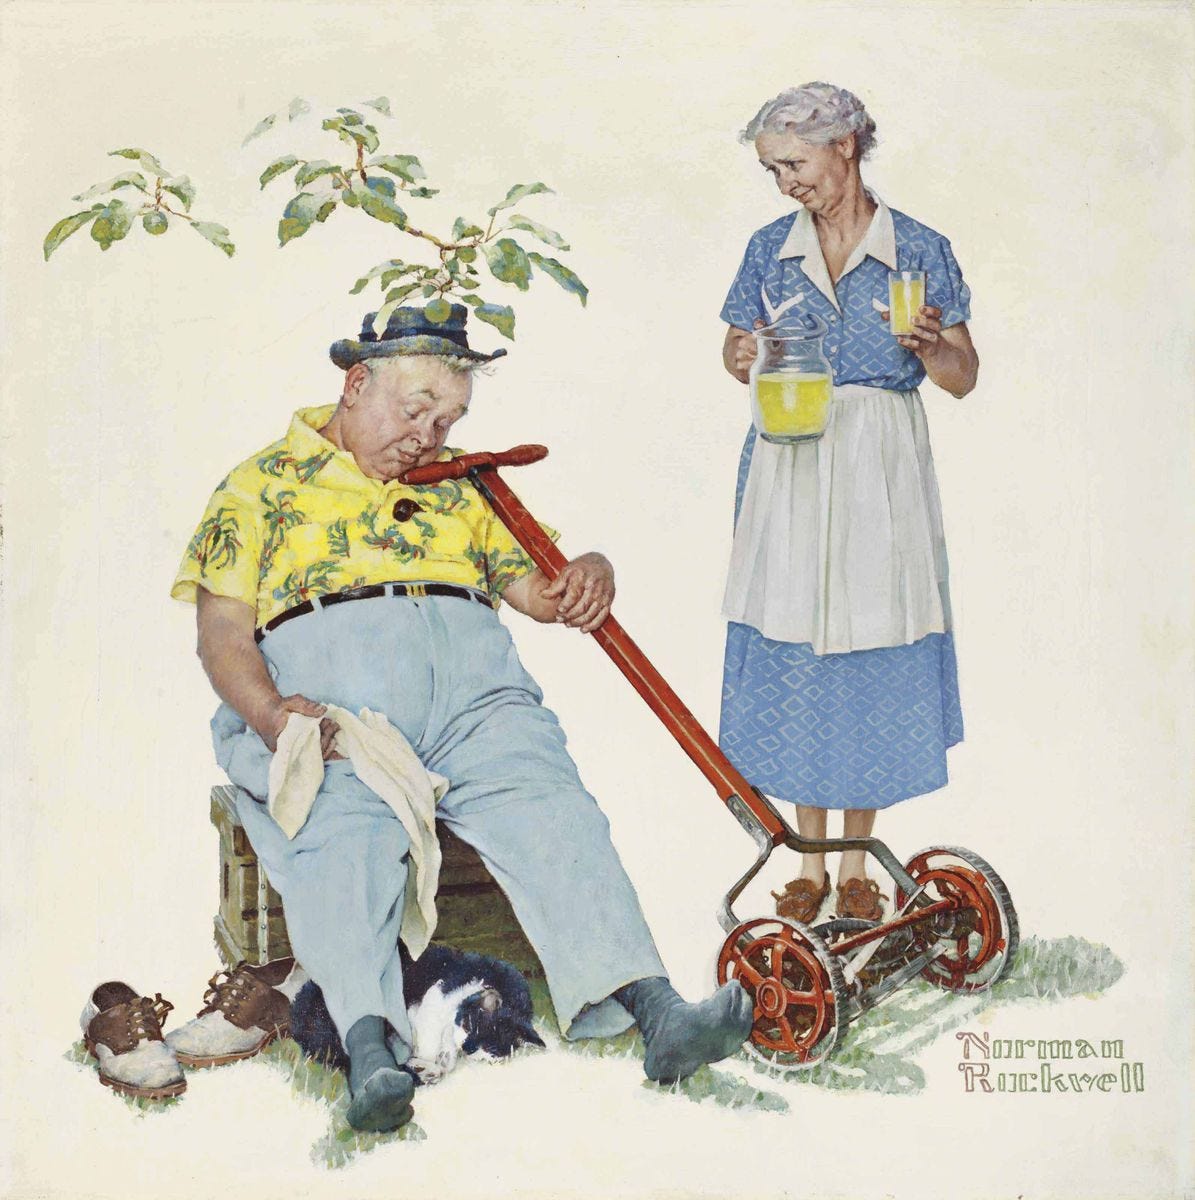 Norman Rockwell (1894-1978) | Norman rockwell paintings, Norman rockwell art, Norman rockwell